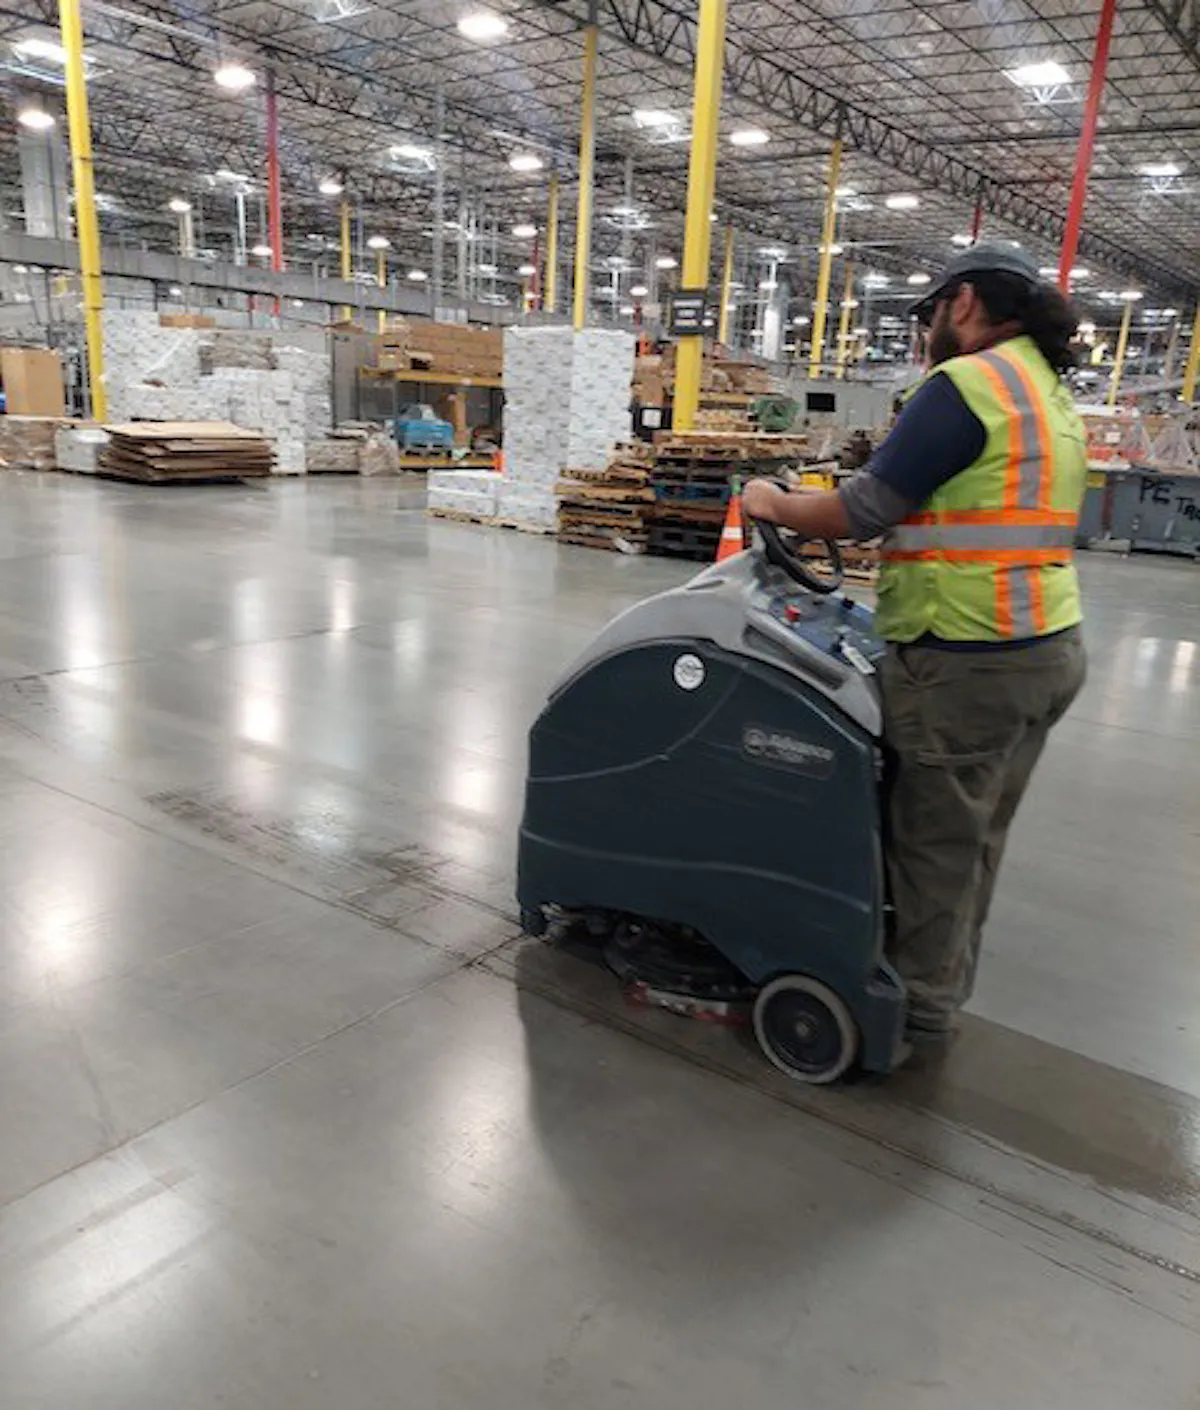 KBS crew member operates a floor cleaner in a warehouse